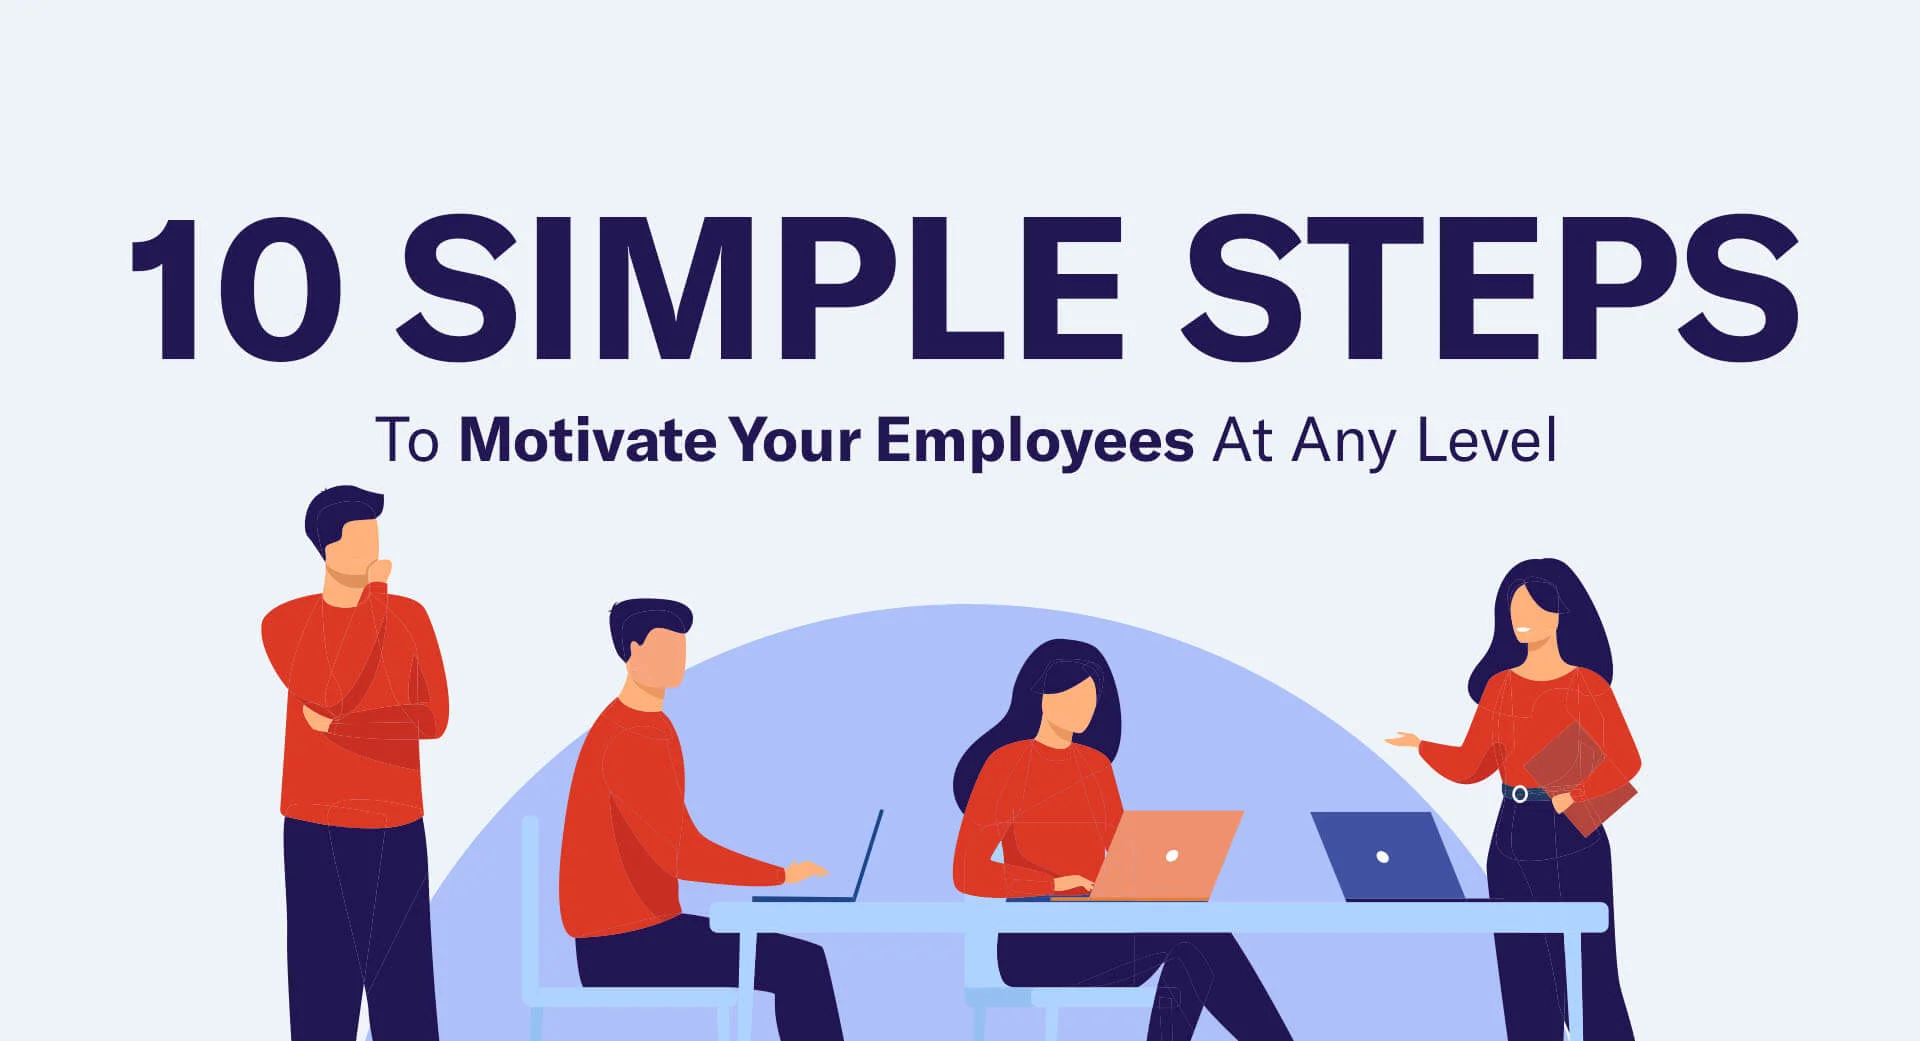 10 Simple Steps To Motivate Your Employees At Any Level